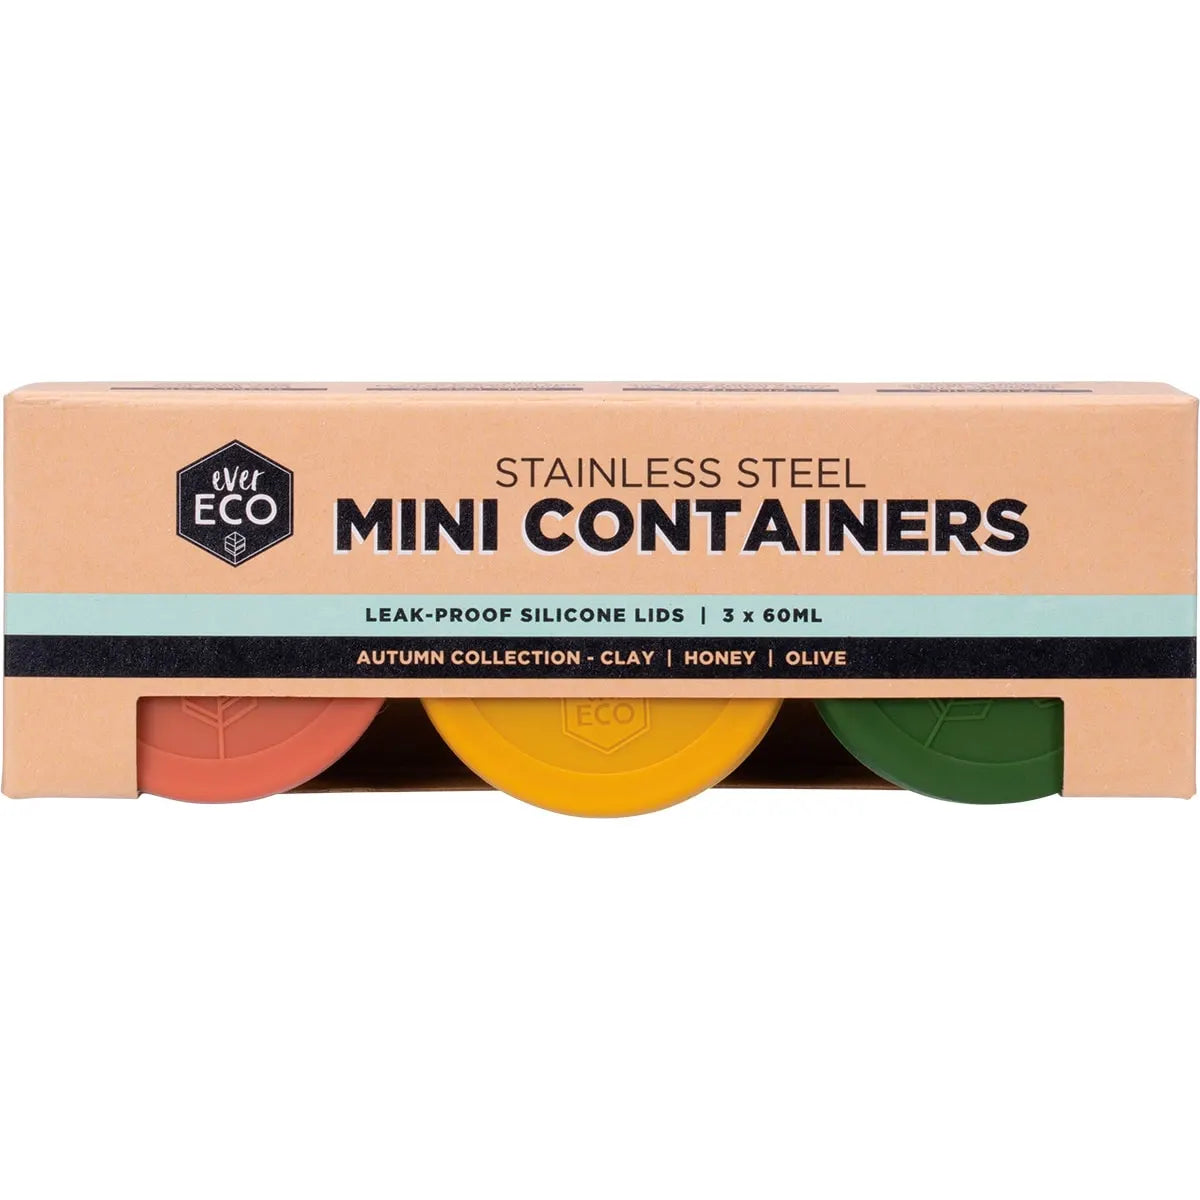 Ever Eco Stainless Steel Mini Containers 3 pack